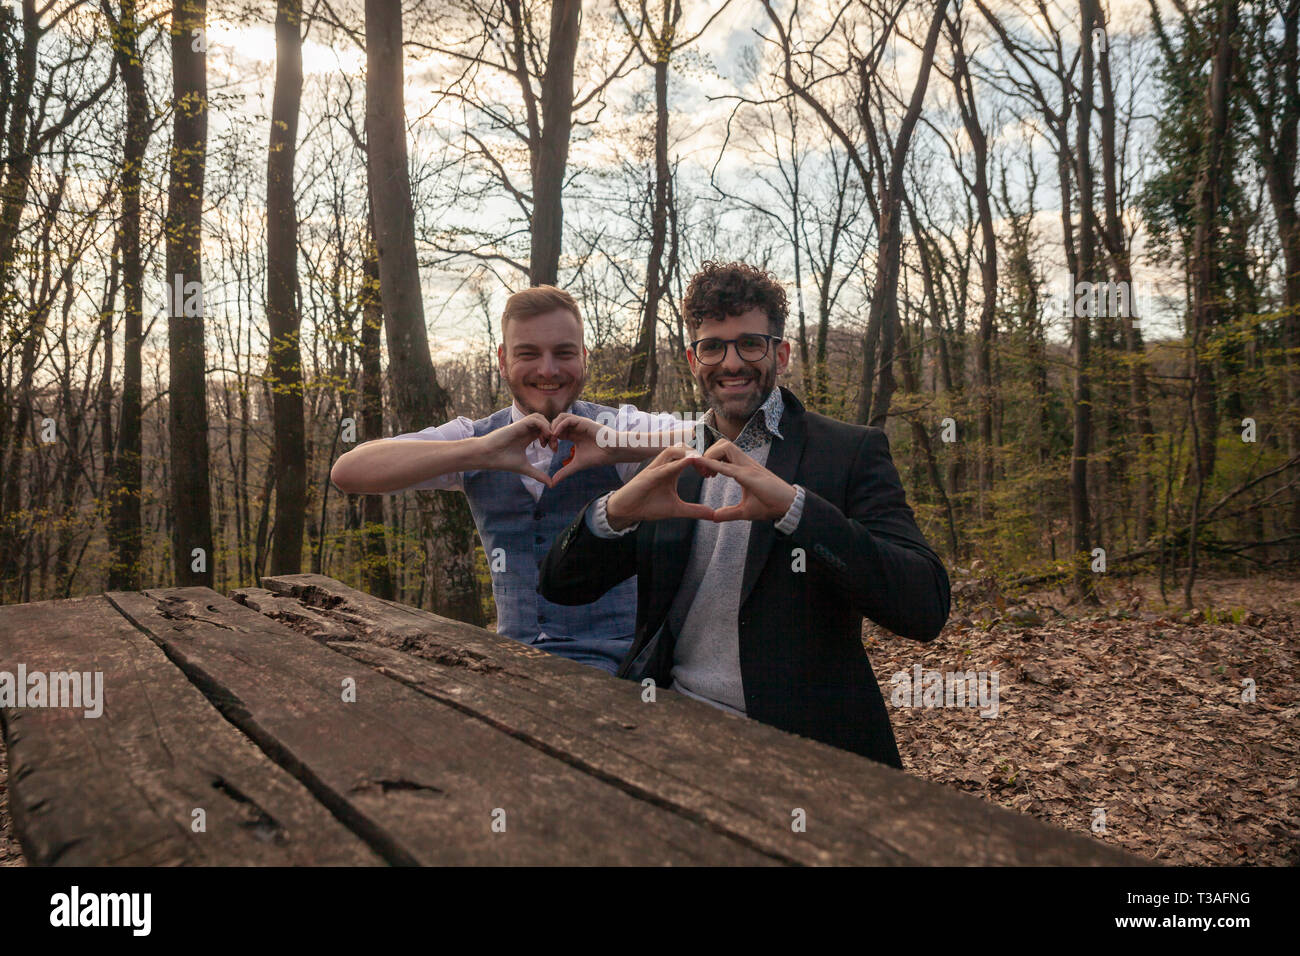 two men, gay couple, smiling and showing heart shape symbol with their hands. Stock Photo